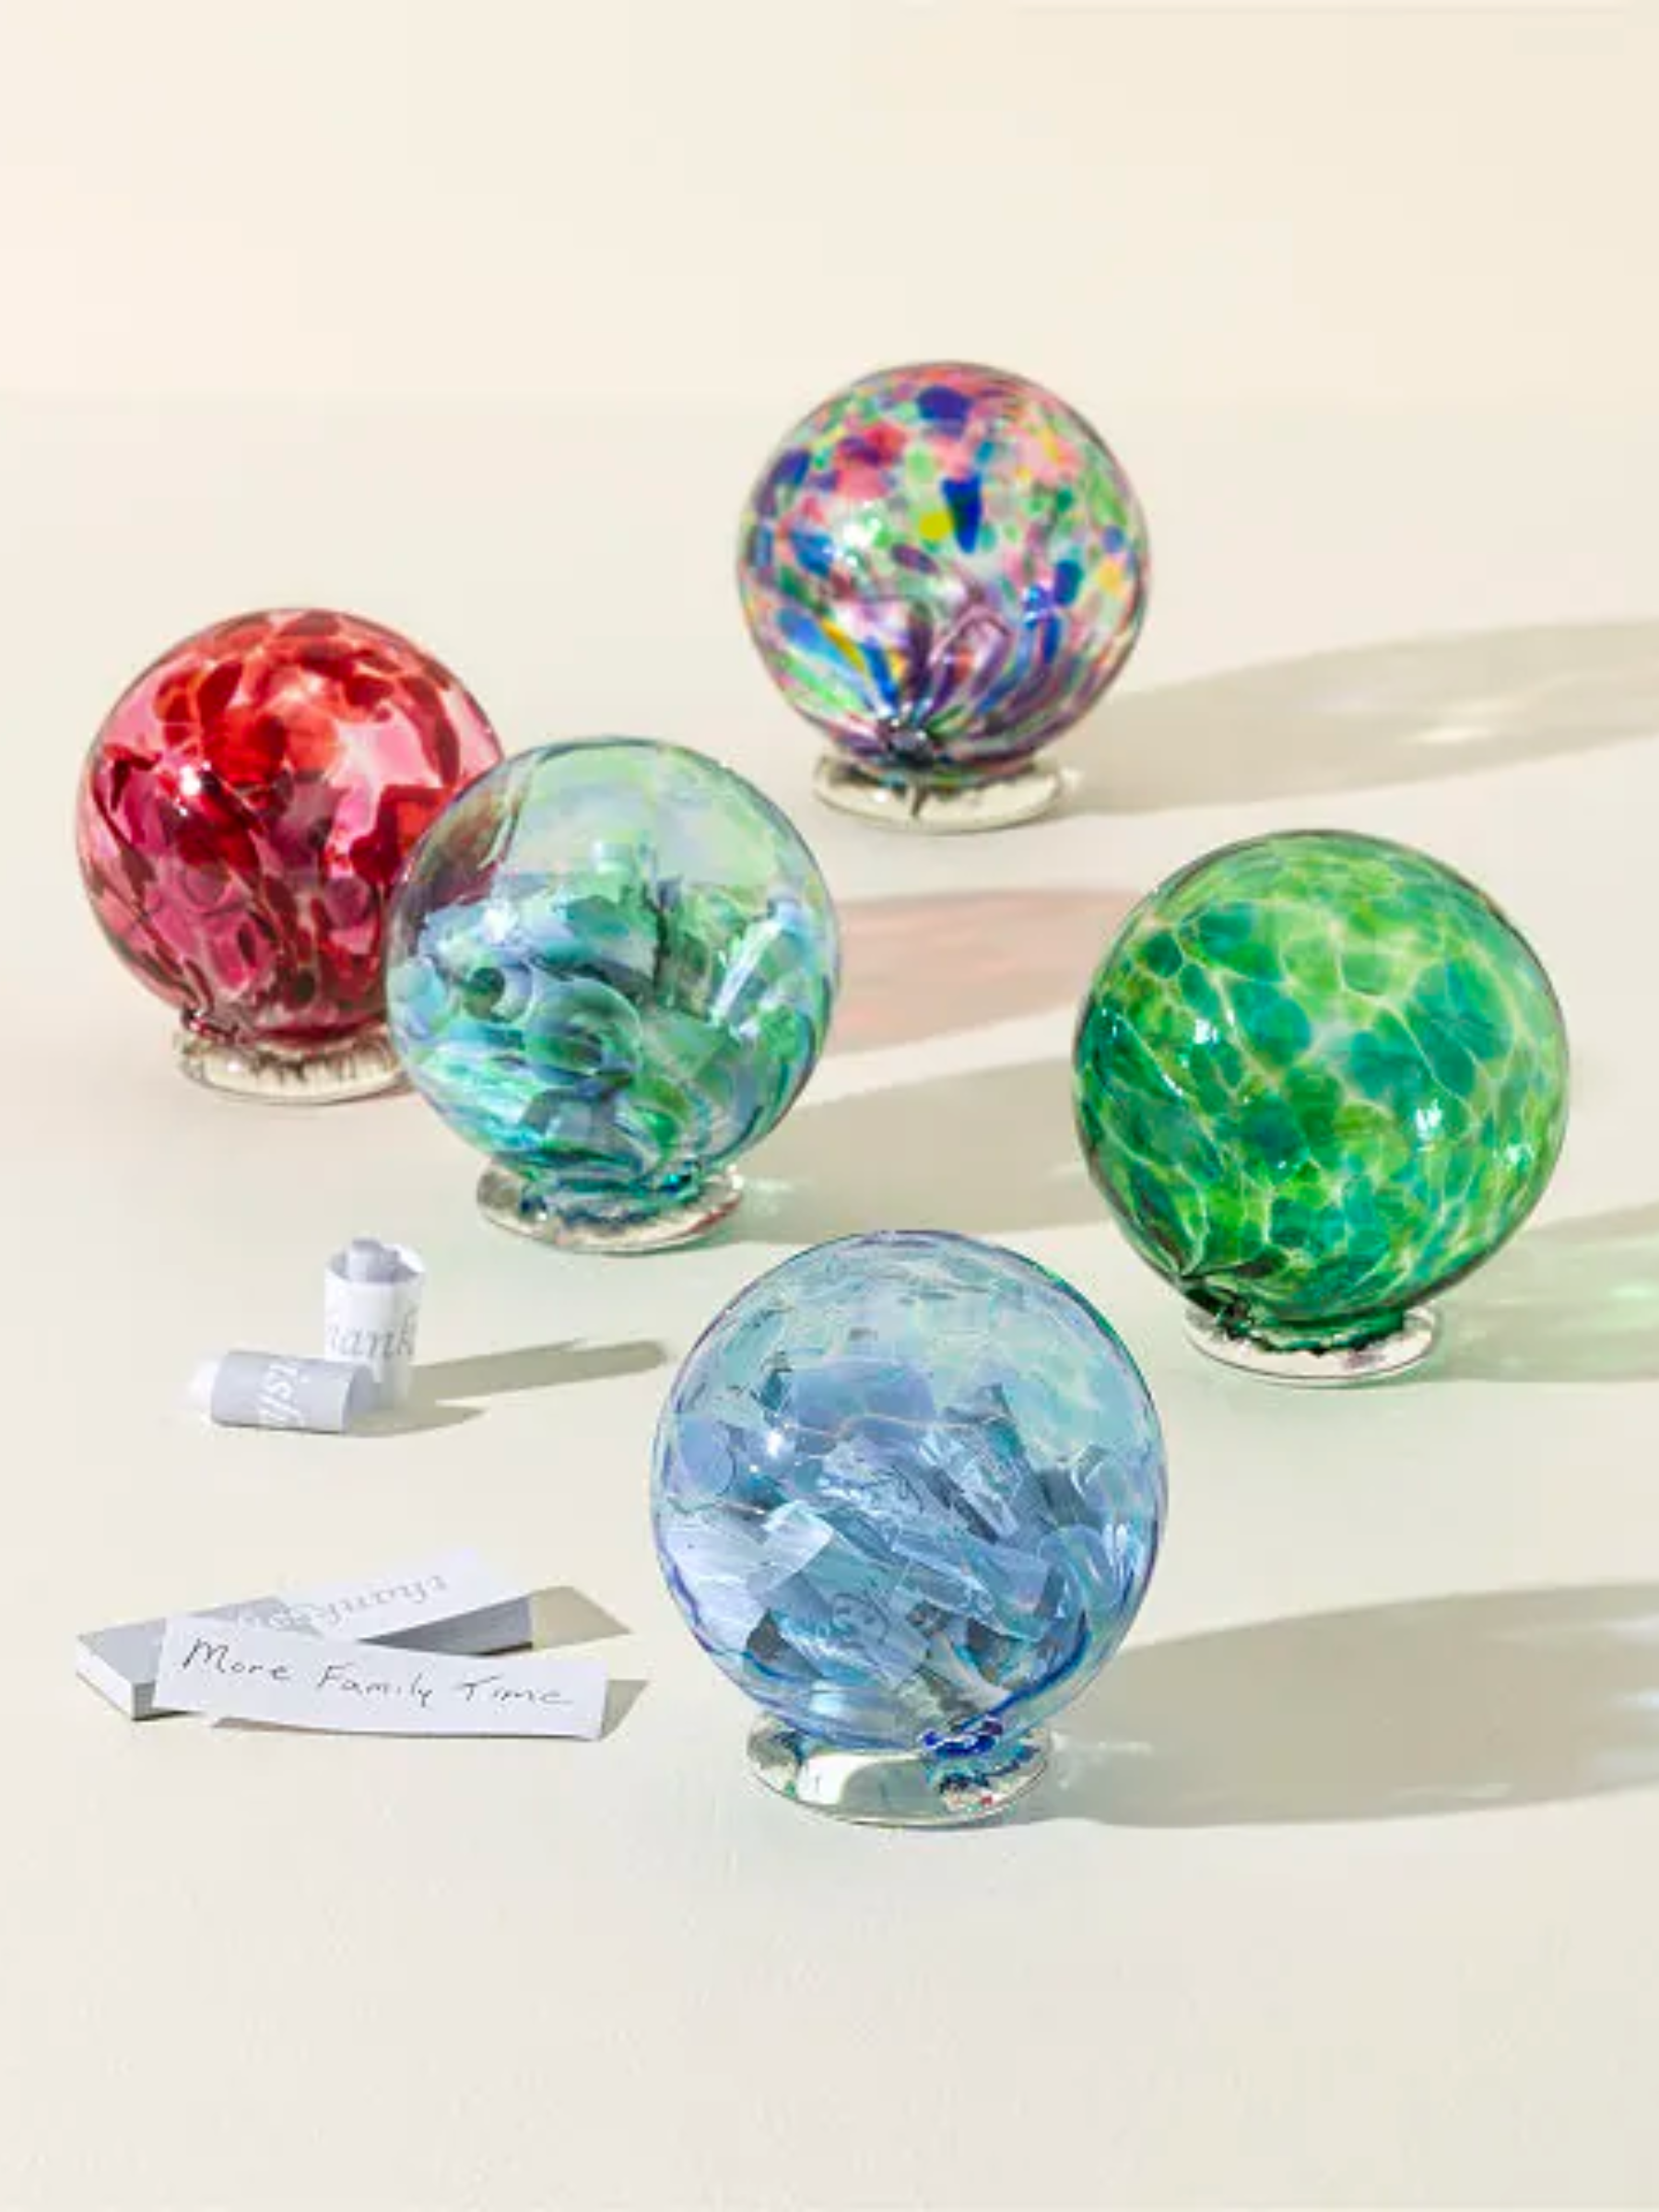 Help them set their goals and intentions for their personal new year with a birthstone wishing ball. There’s a different color glass for each month and each kit comes with 52 slips of paper for them to write a goal, wish, or accomplishment for each week of the year. $35, Uncommon Goods. <a href="https://www.uncommongoods.com/product/birthstone-wishing-balls/264460000002">Get it now!</a><p>Sign up for today’s biggest stories, from pop culture to politics.</p><a href="https://www.glamour.com/newsletter/news?sourceCode=msnsend">Sign Up</a>